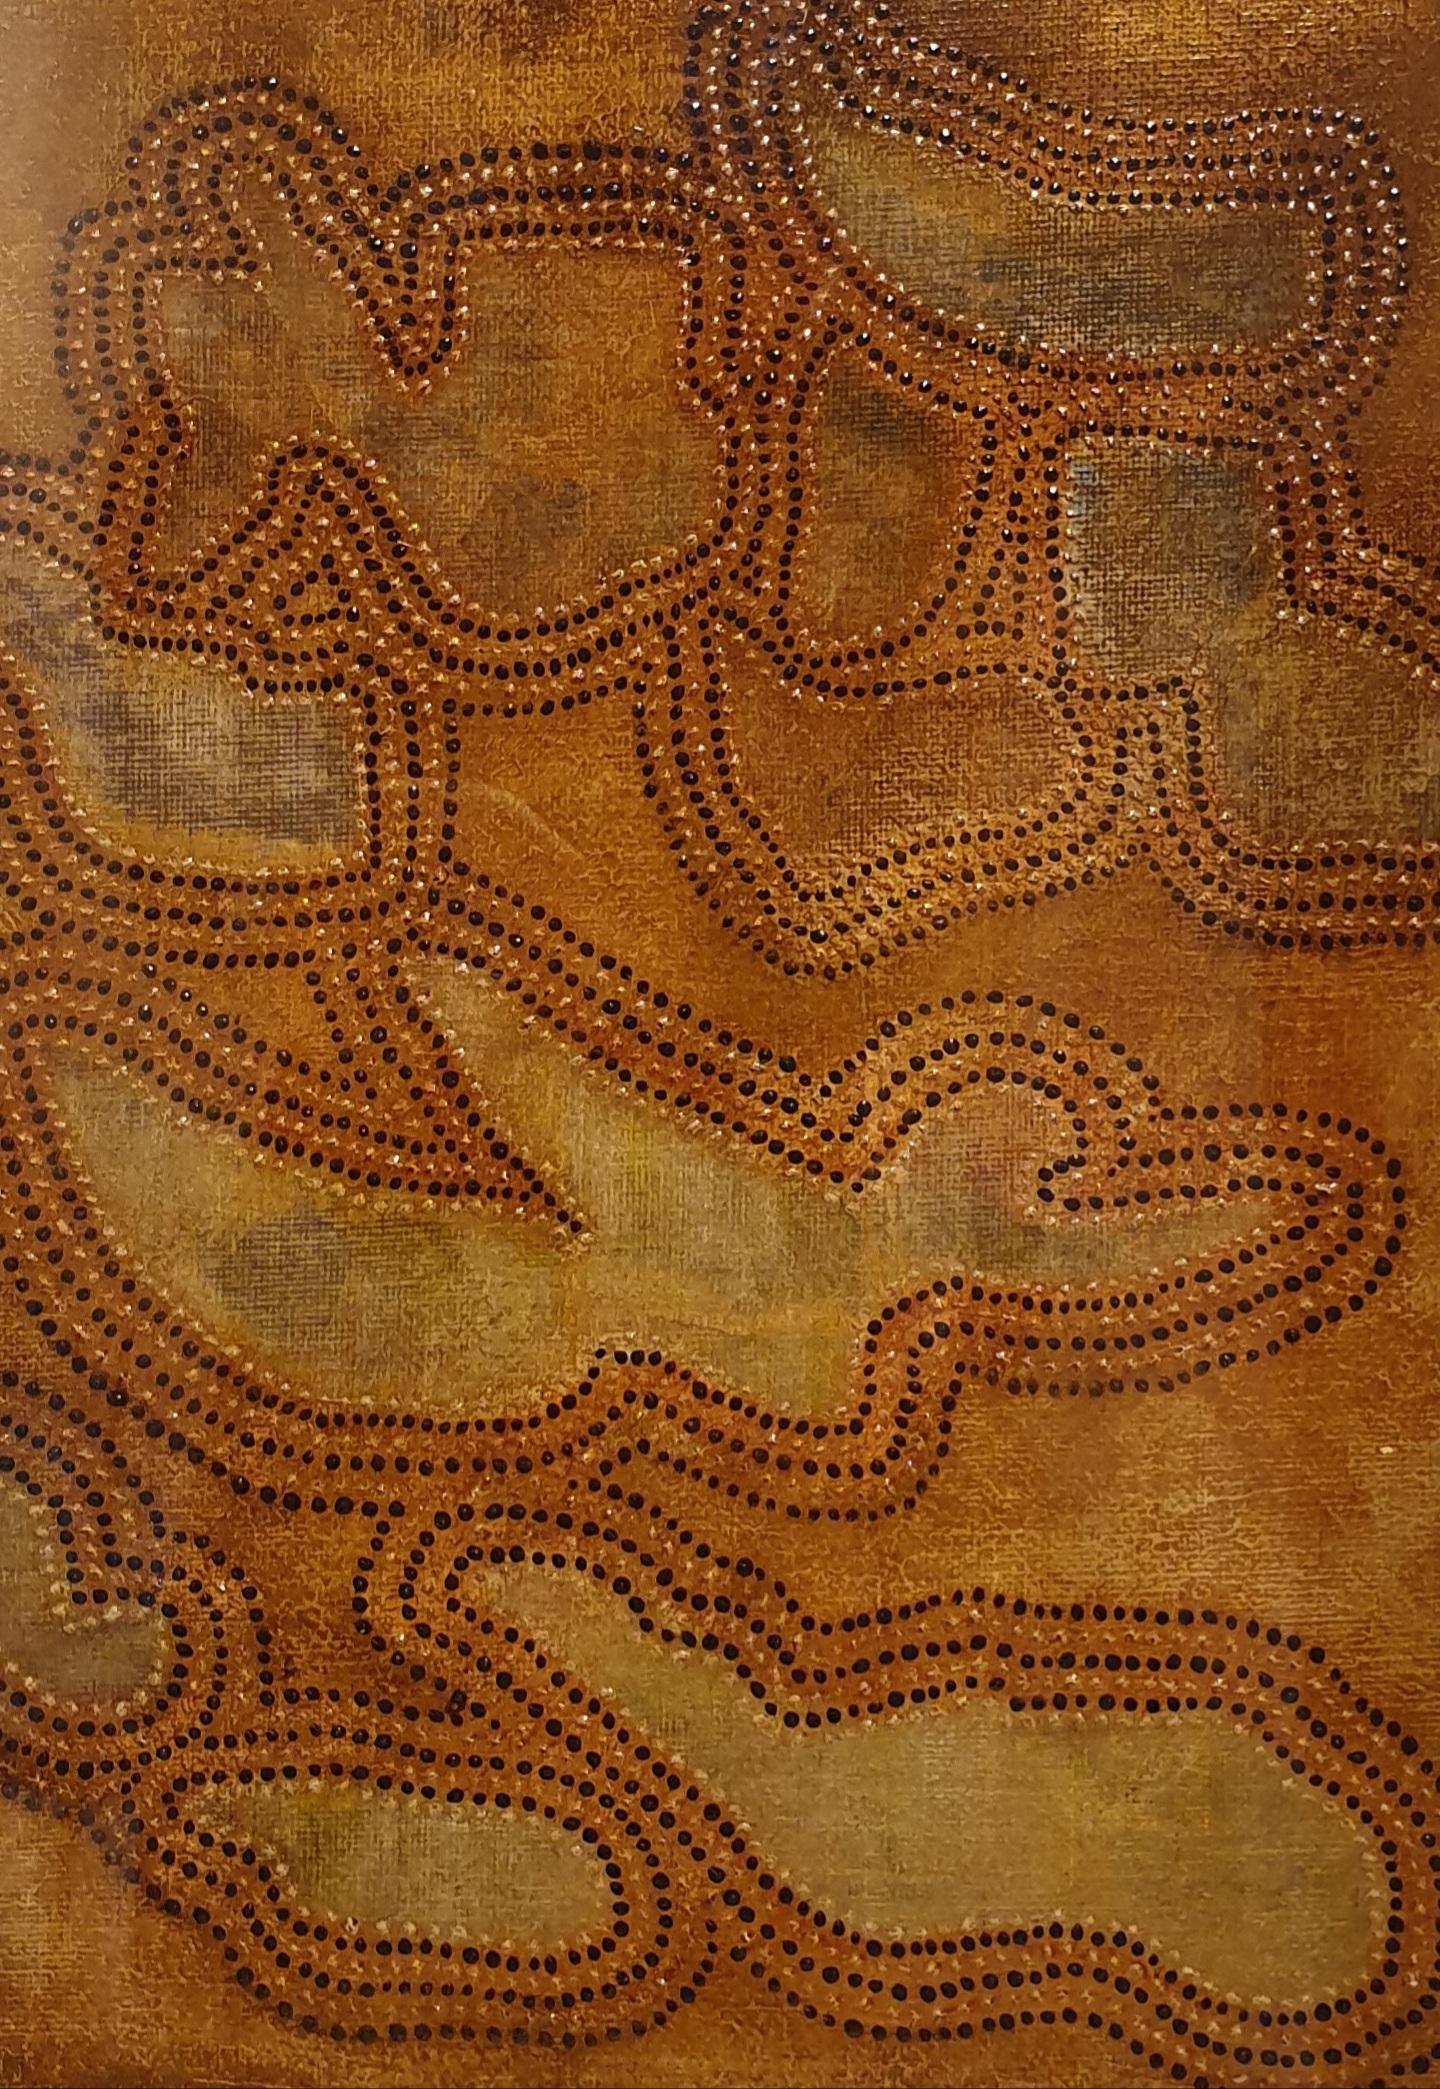 Contemporary Aboriginal Inspired Abstract. - Painting by Menno Modderman